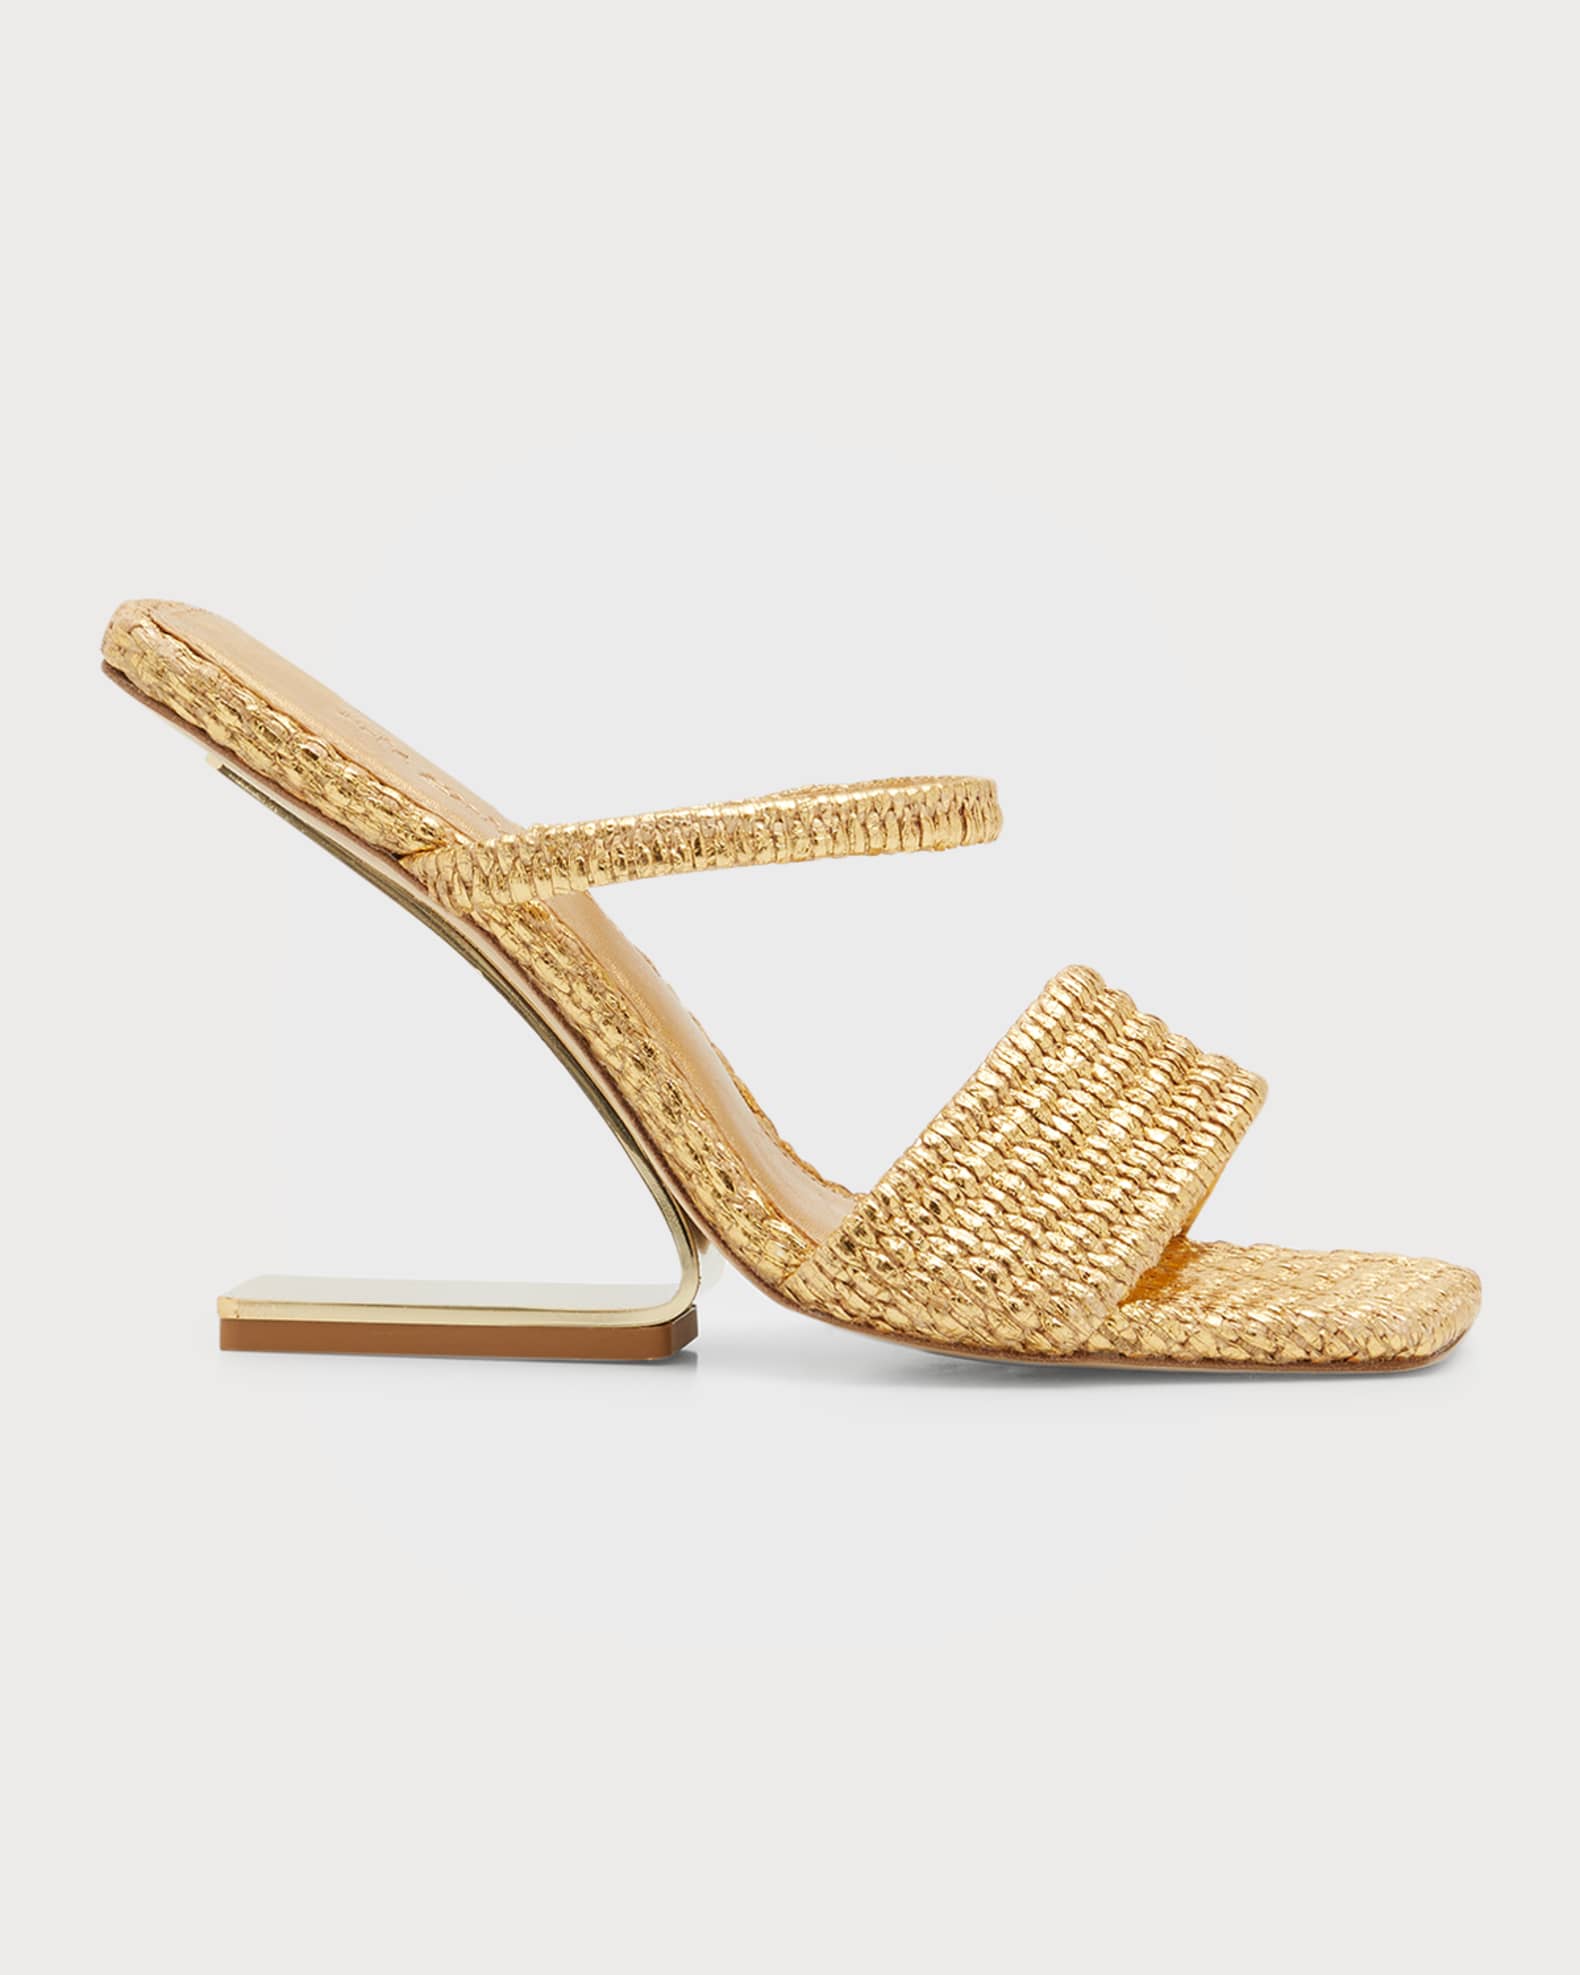 Comfortable gold sandals from Cult Gaia